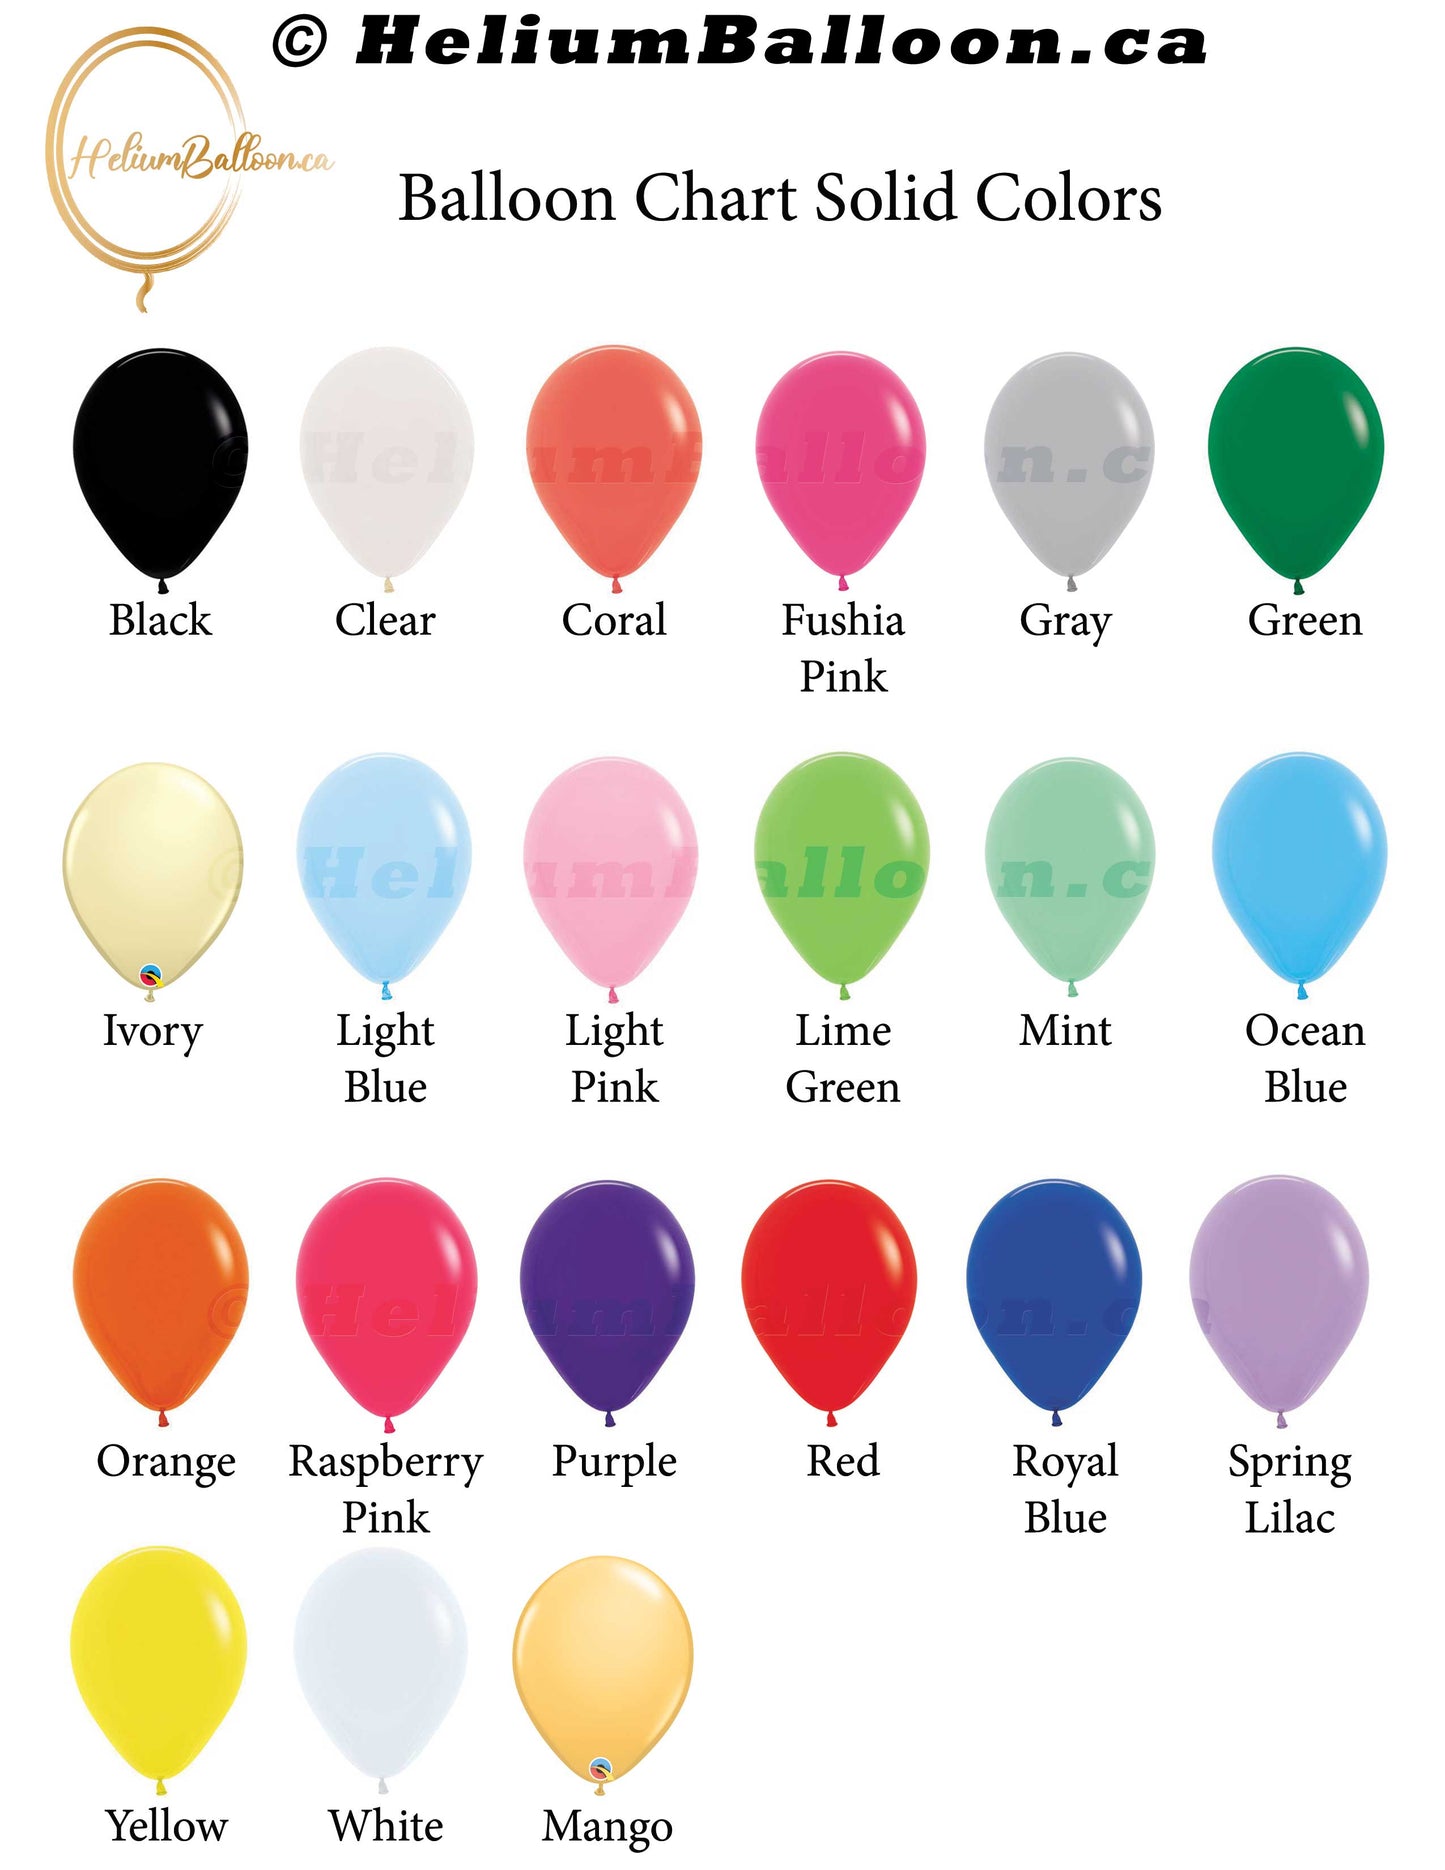 Set of Individual Latex Solid Ceiling Balloons 11" - FLOATING TIME 12 or 48 HOURS - ( Colors Available )